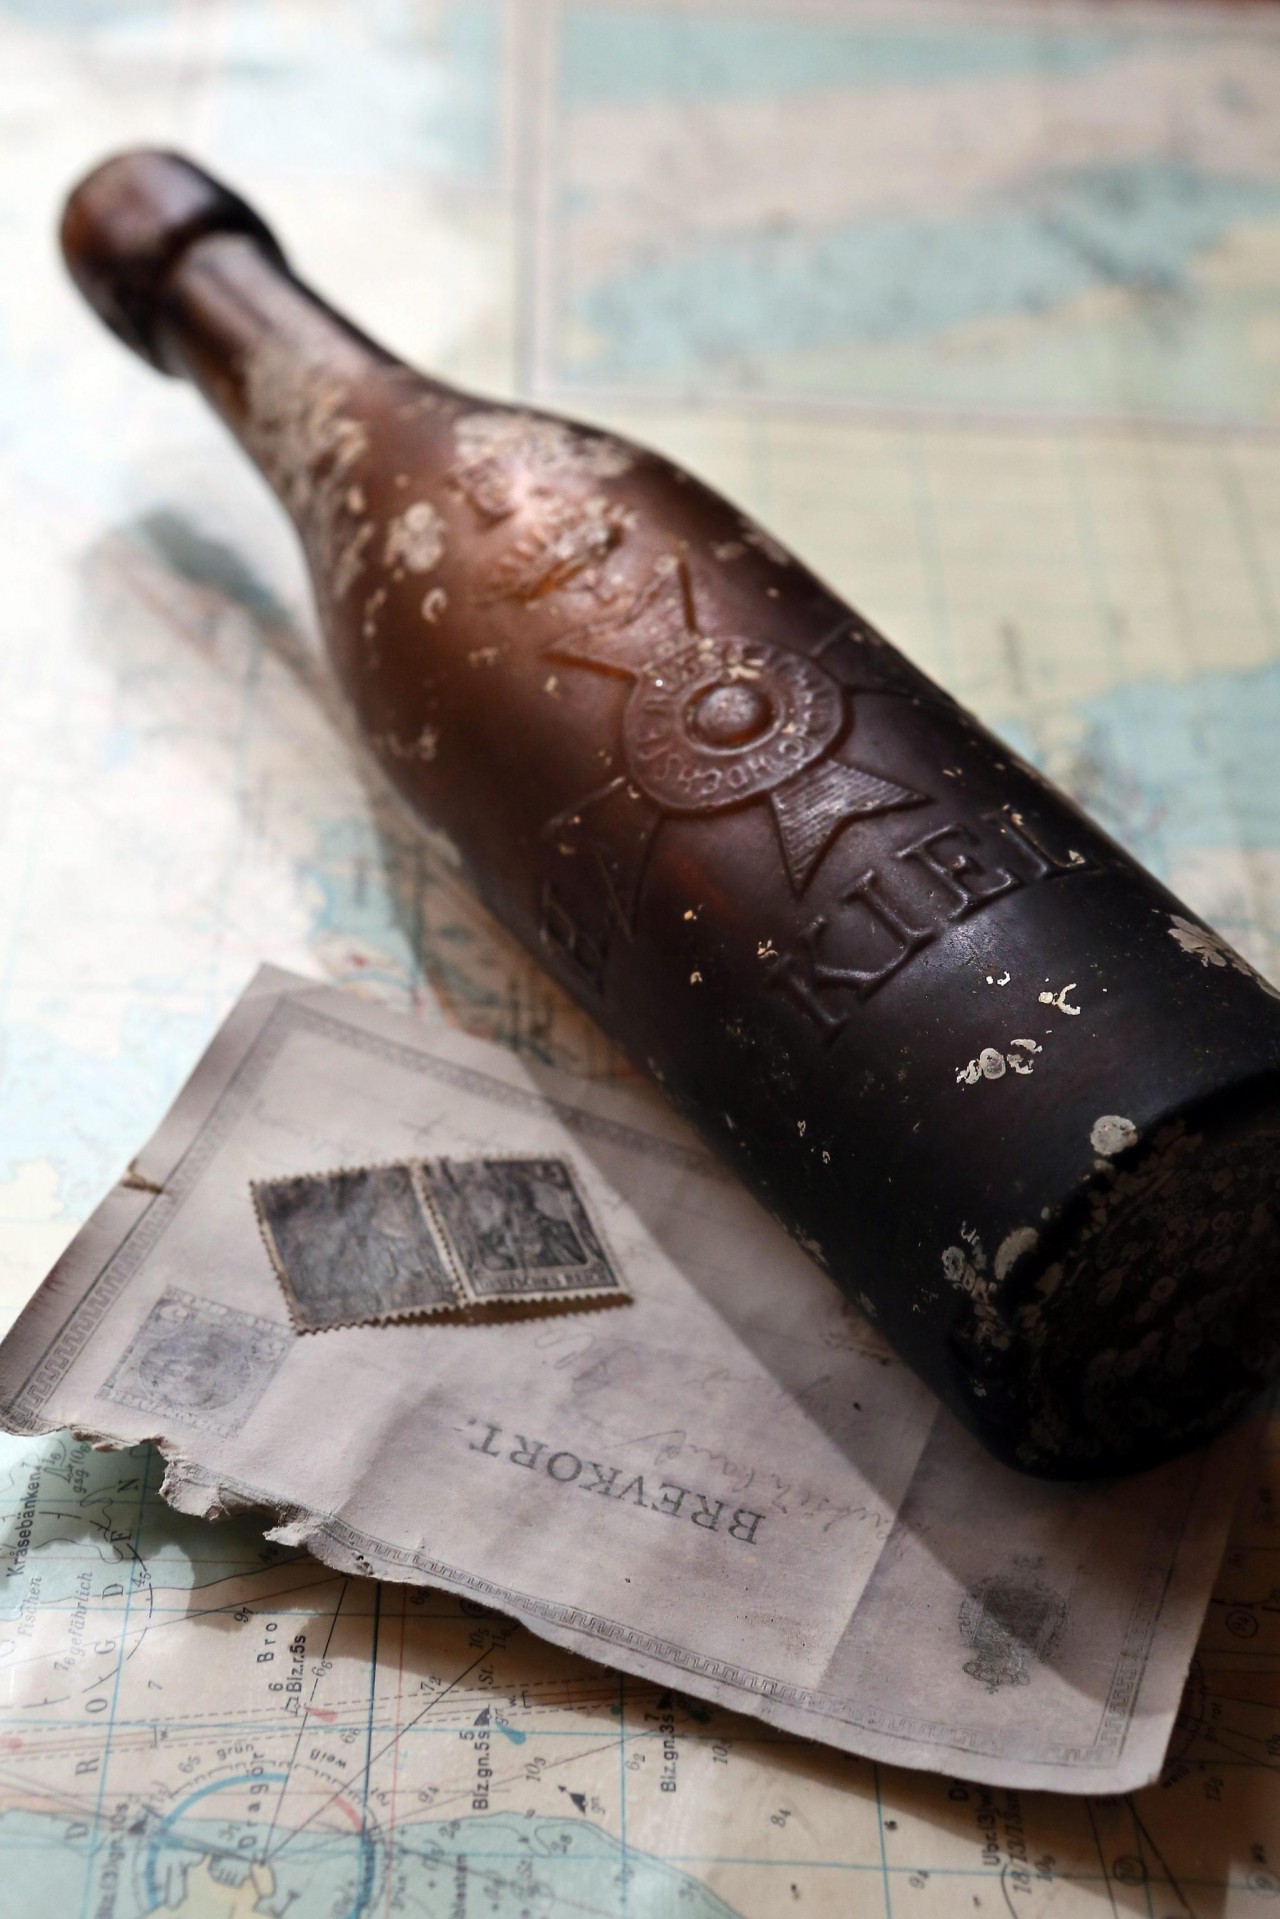 Oldest bottle and message found by Baltic fishermen. Photo: Historyblog 